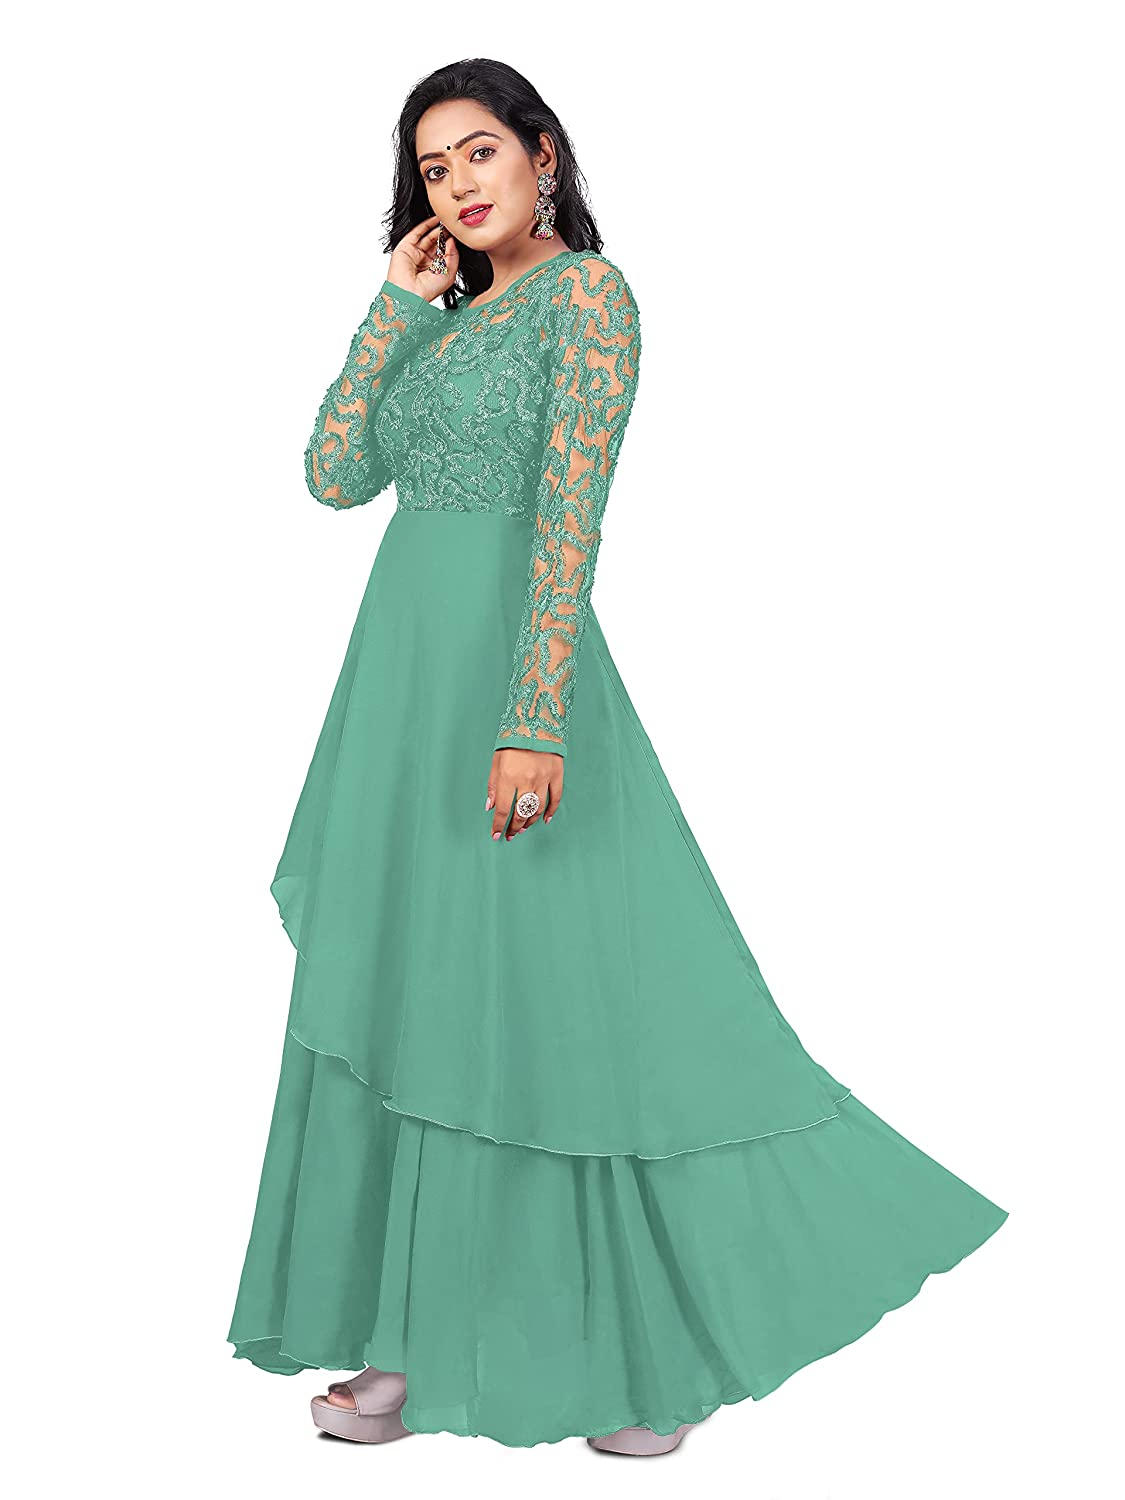 FIBREZA Women's Georgette Traditional Ethnic Long Gown Western Dress with Round Neck Long Sleeve Ribbin Embroidery Work -  Gowns in Sri Lanka from Arcade Online Shopping - Just Rs. 6799!